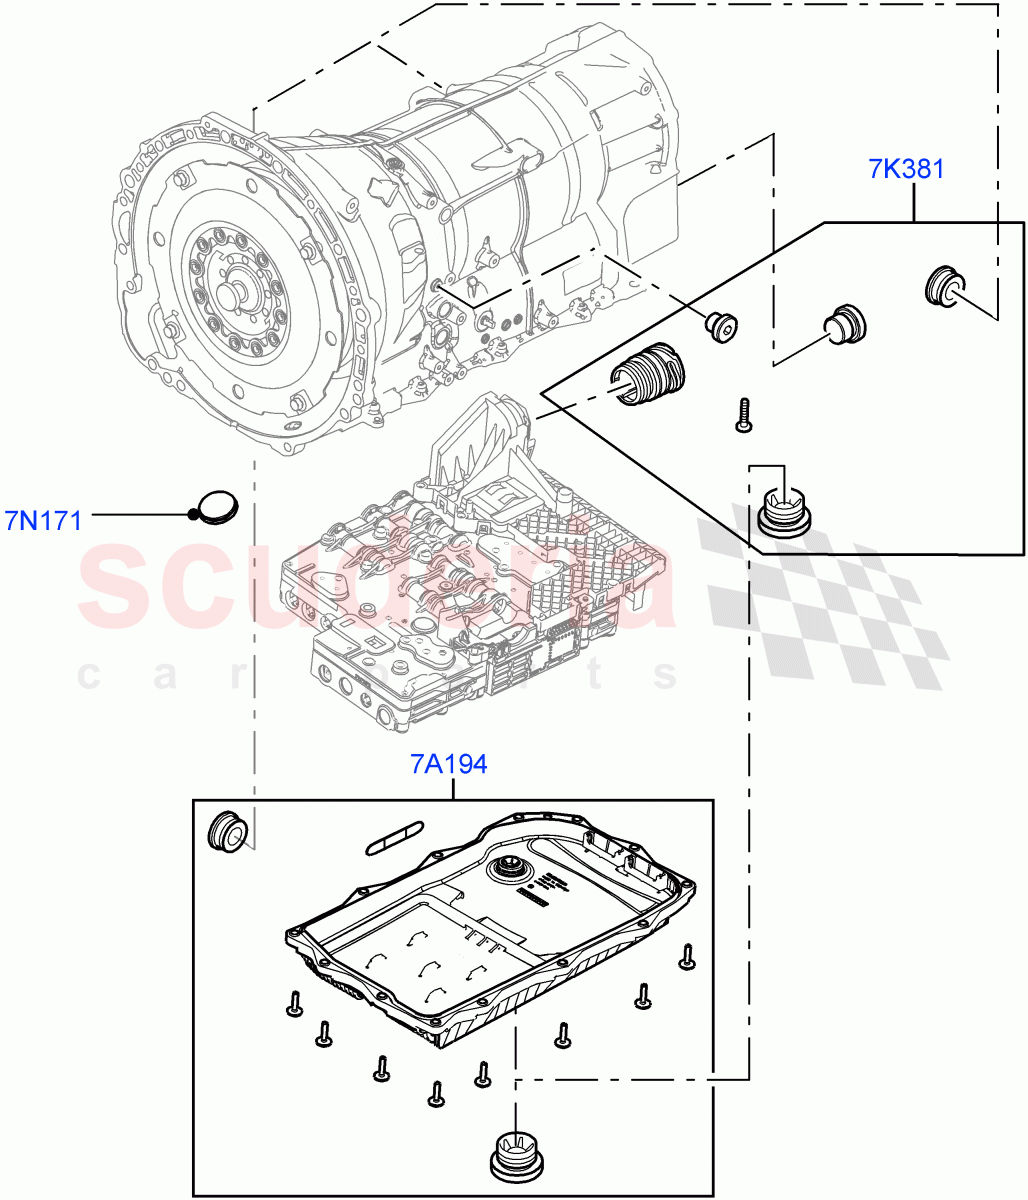 Transmission External Components(3.0 V6 Diesel,8 Speed Auto Trans ZF 8HP70 4WD)((V)FROMCA000001) of Land Rover Land Rover Range Rover Sport (2010-2013) [3.0 Diesel 24V DOHC TC]